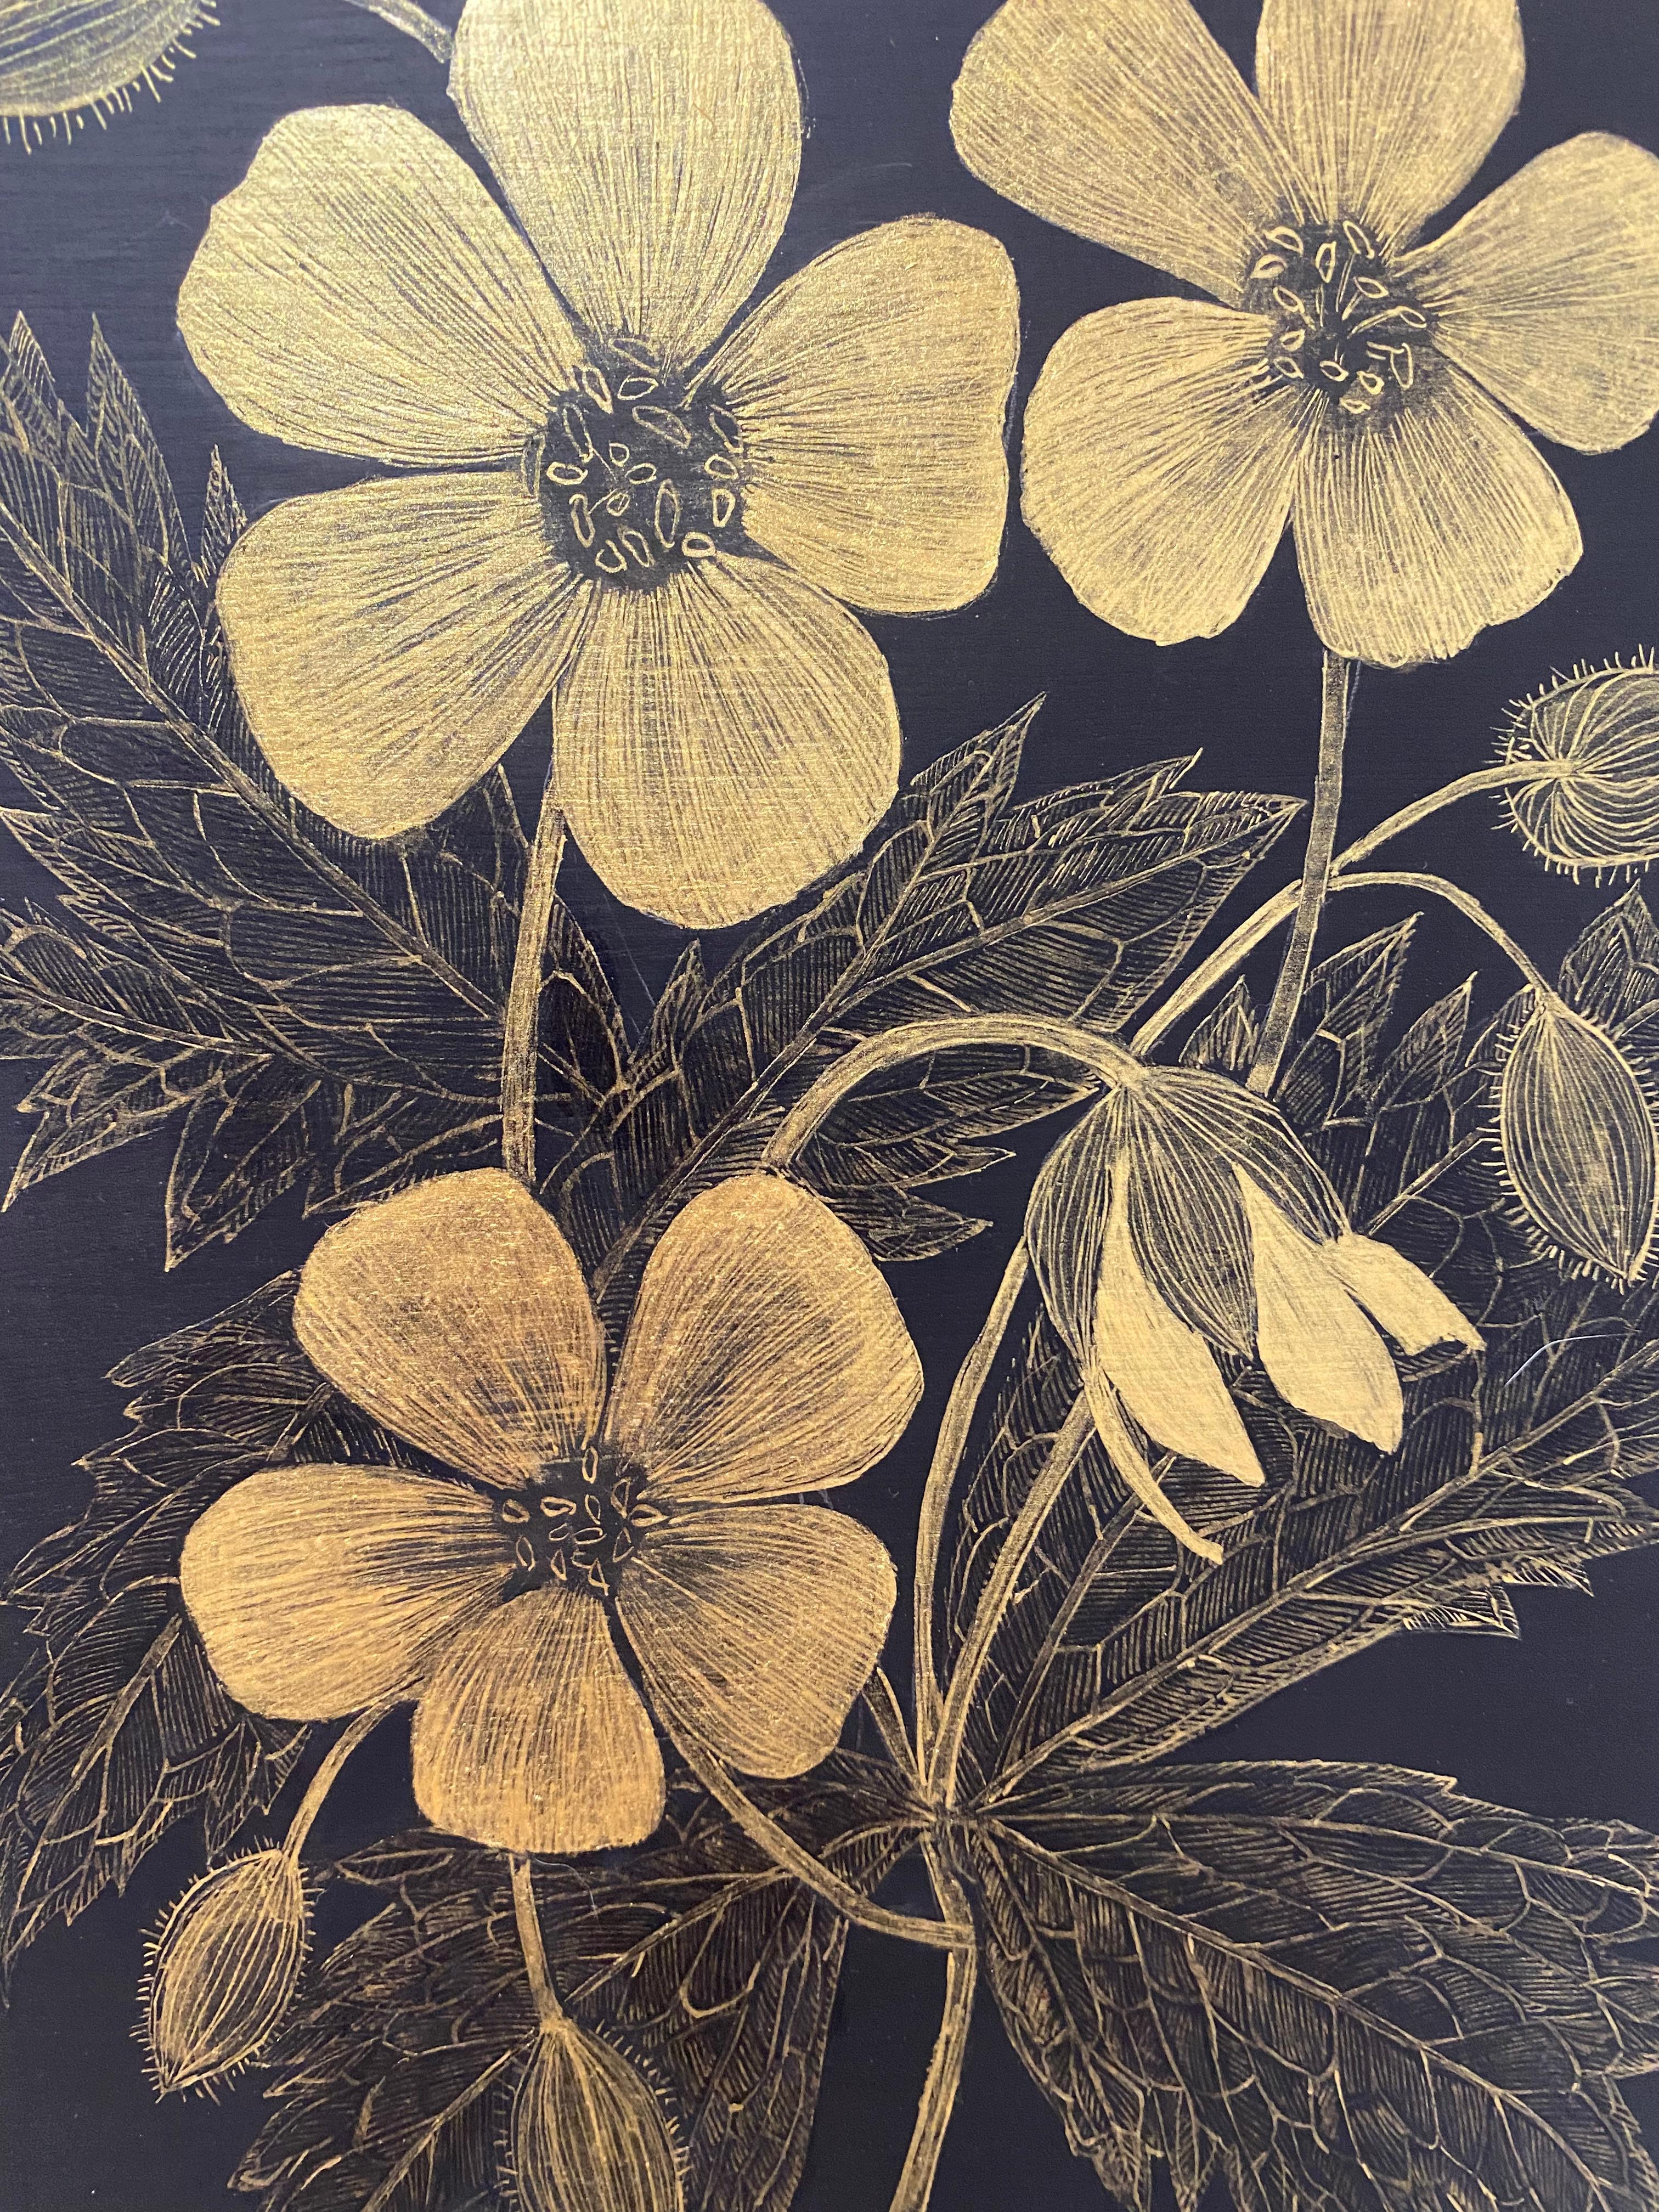 Wild Geranium Two, Botanical Painting Black Panel, Gold Flowers, Leaves, Stem For Sale 2